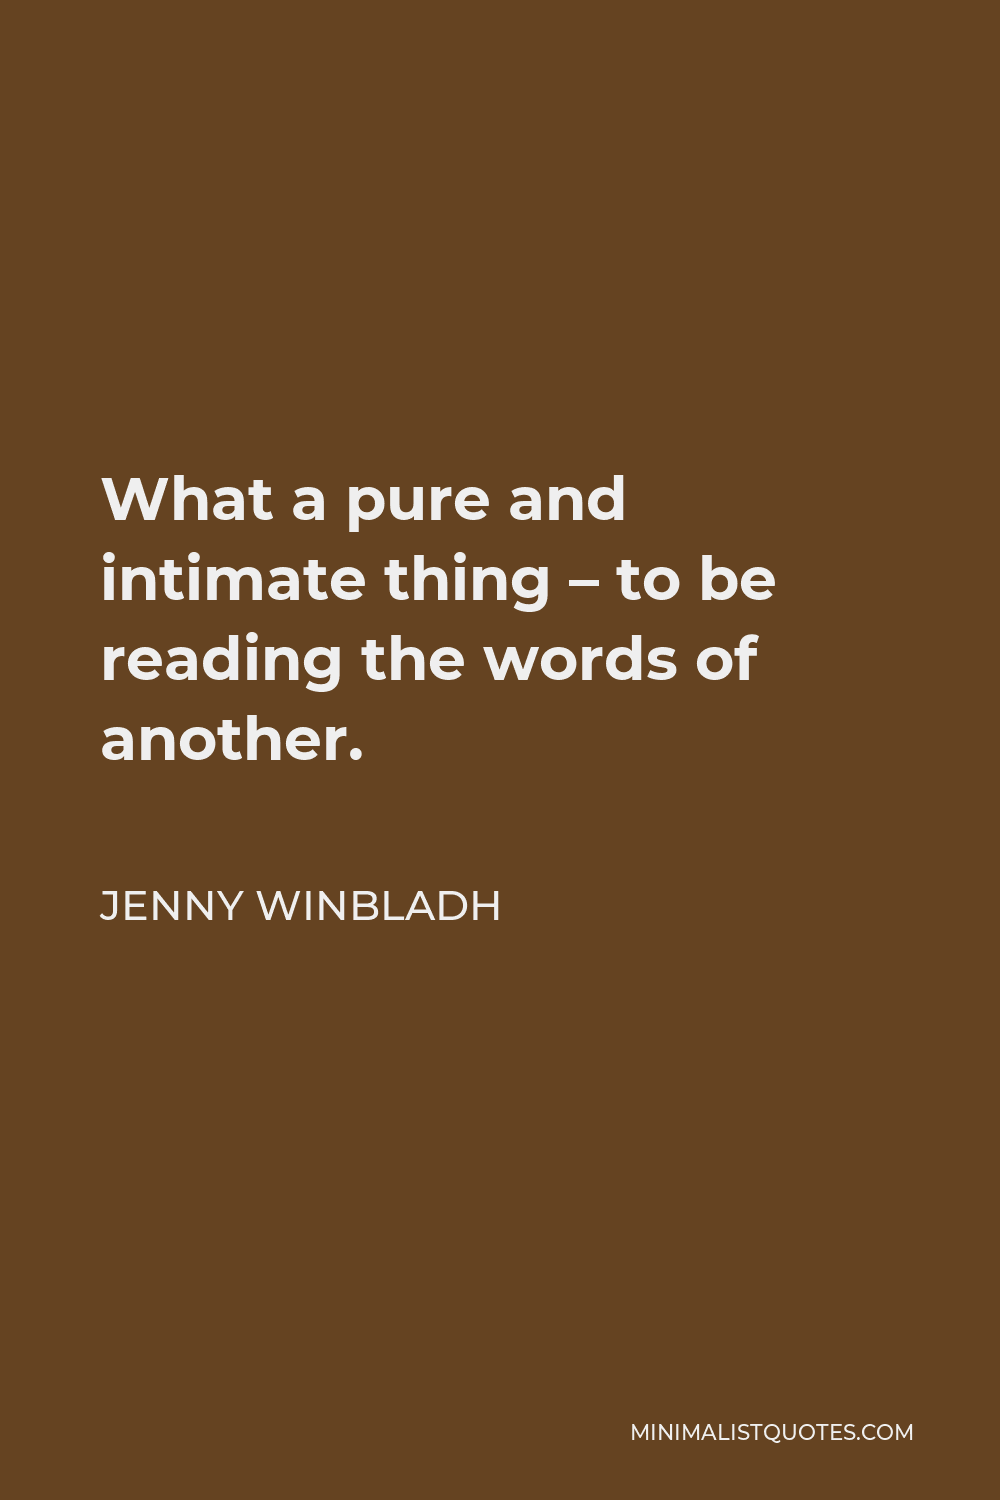 Jenny Winbladh Quote - What a pure and intimate thing – to be reading the words of another.